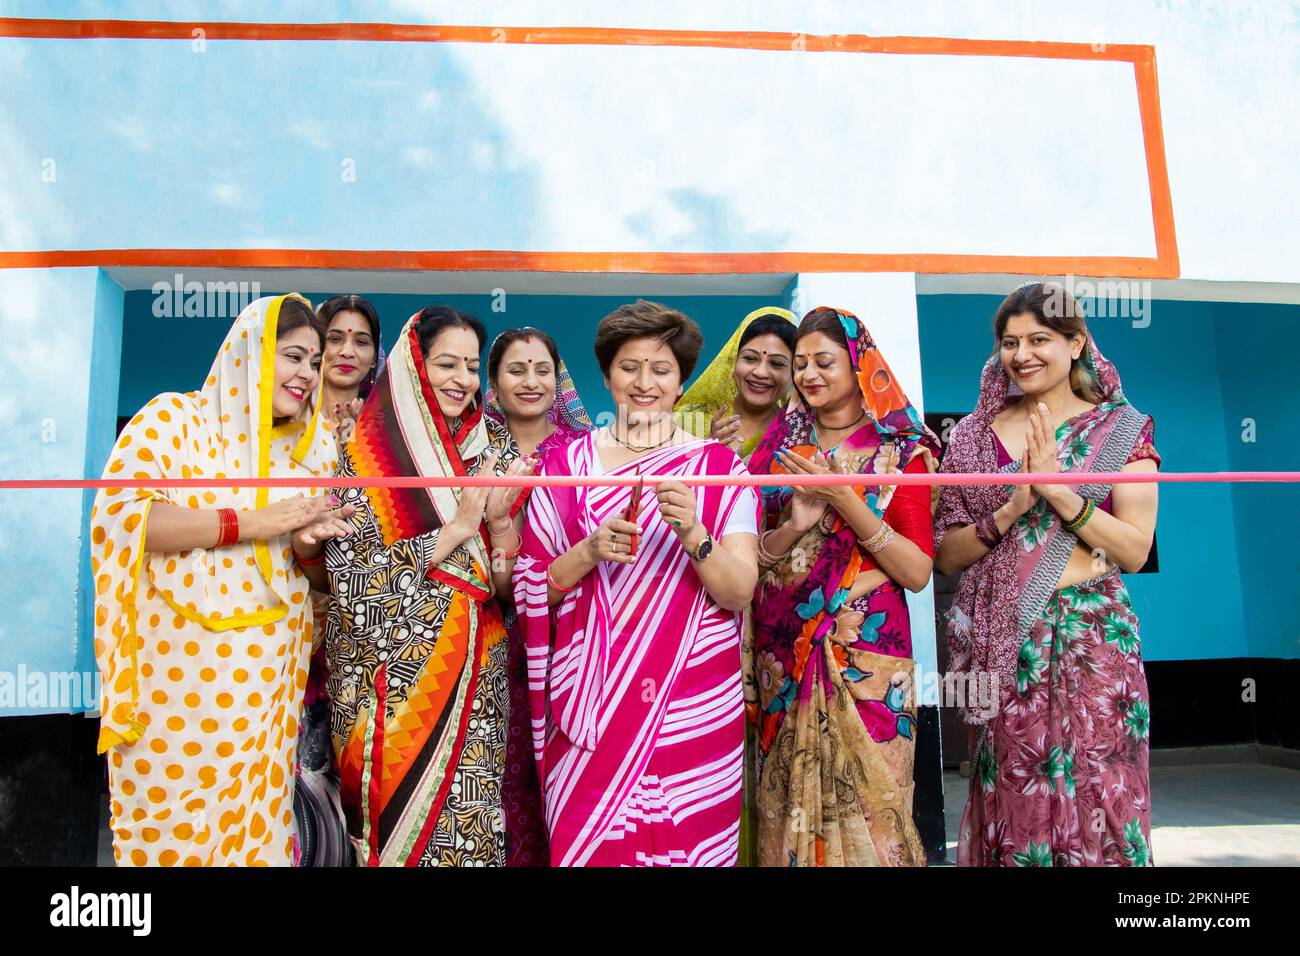 Indian woman in sari cutting red ribbon while colleagues are clapping hands. Women empowerment. Stock Photo